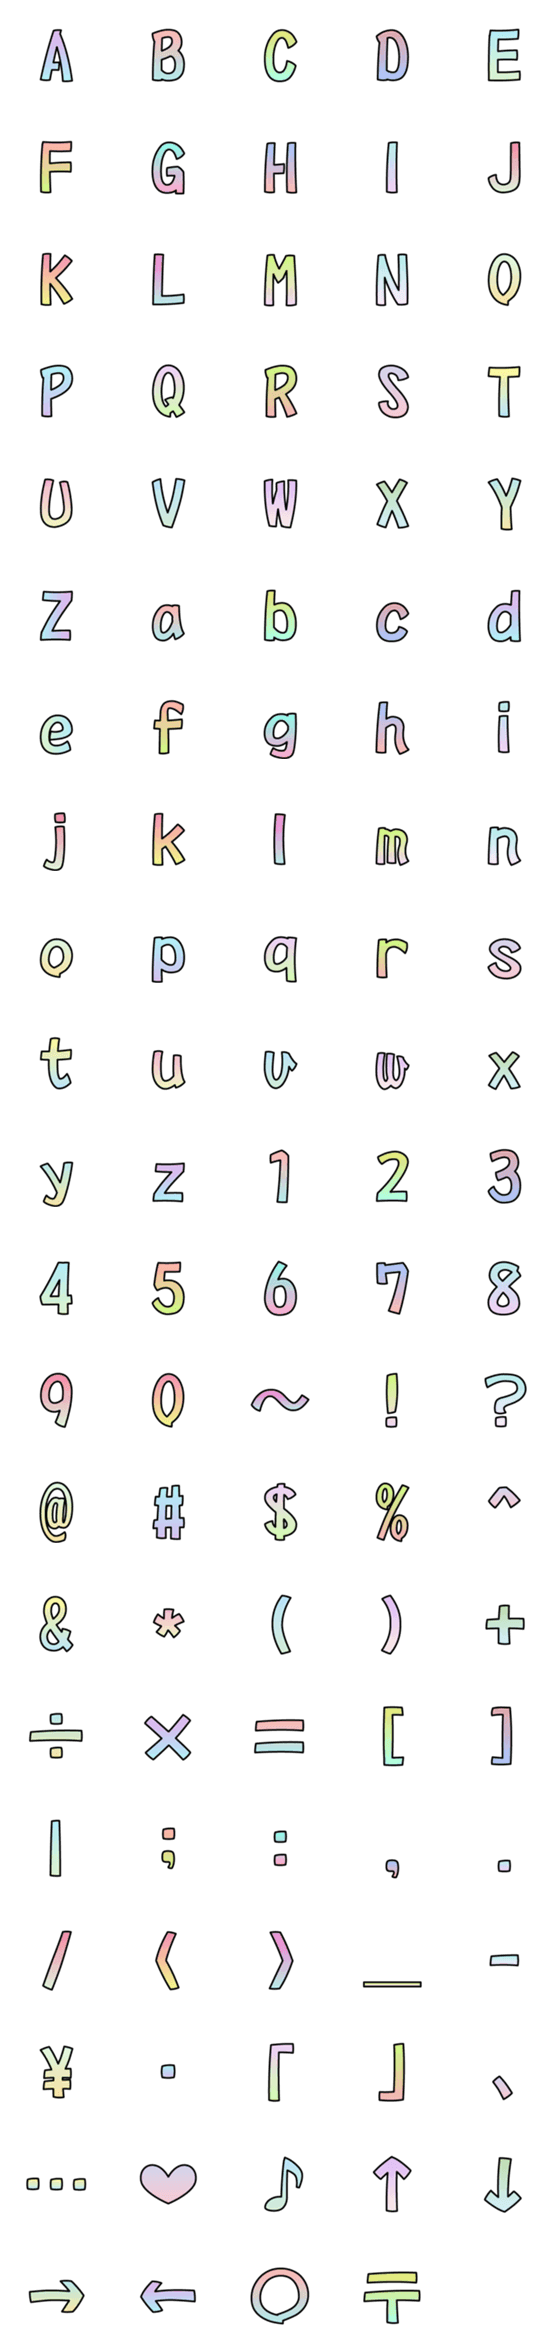 [LINE絵文字]aall-カラフルグラデーション絵文字-英数字の画像一覧